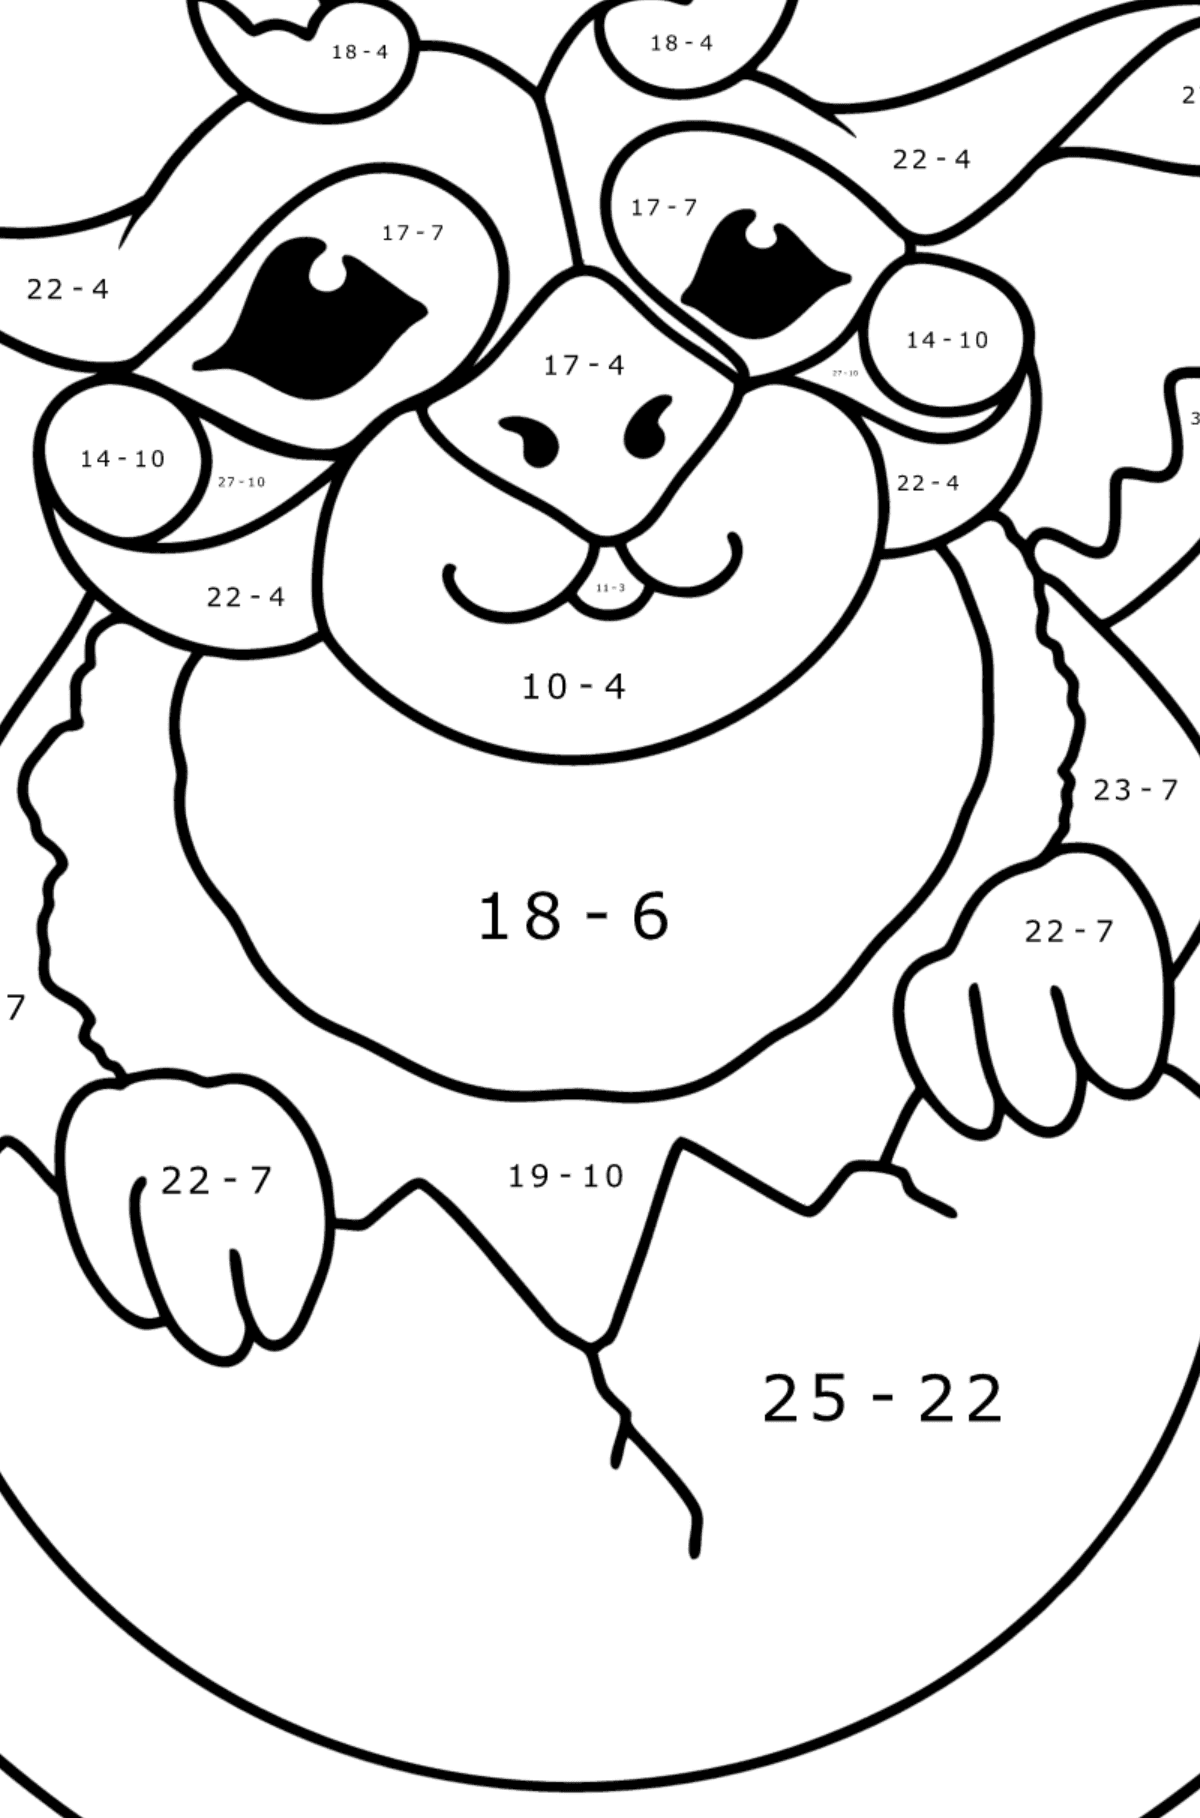 Little dragon coloring page - Math Coloring - Subtraction for Kids